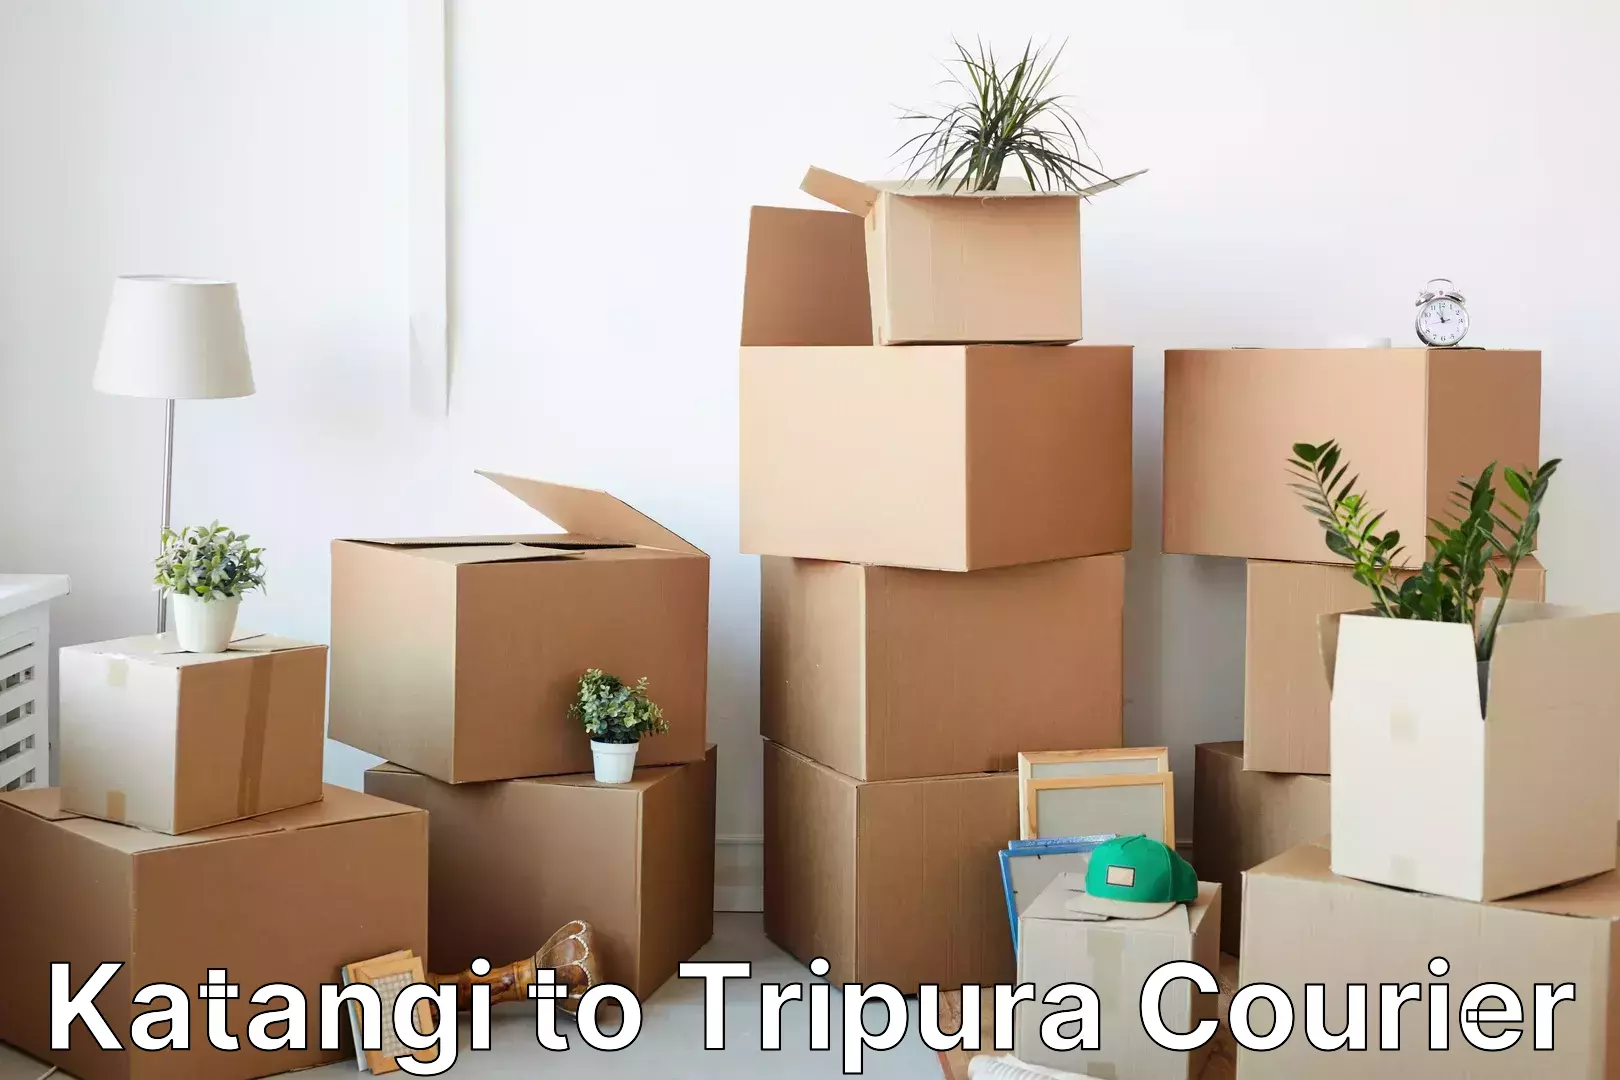 Fast delivery service in Katangi to Tripura